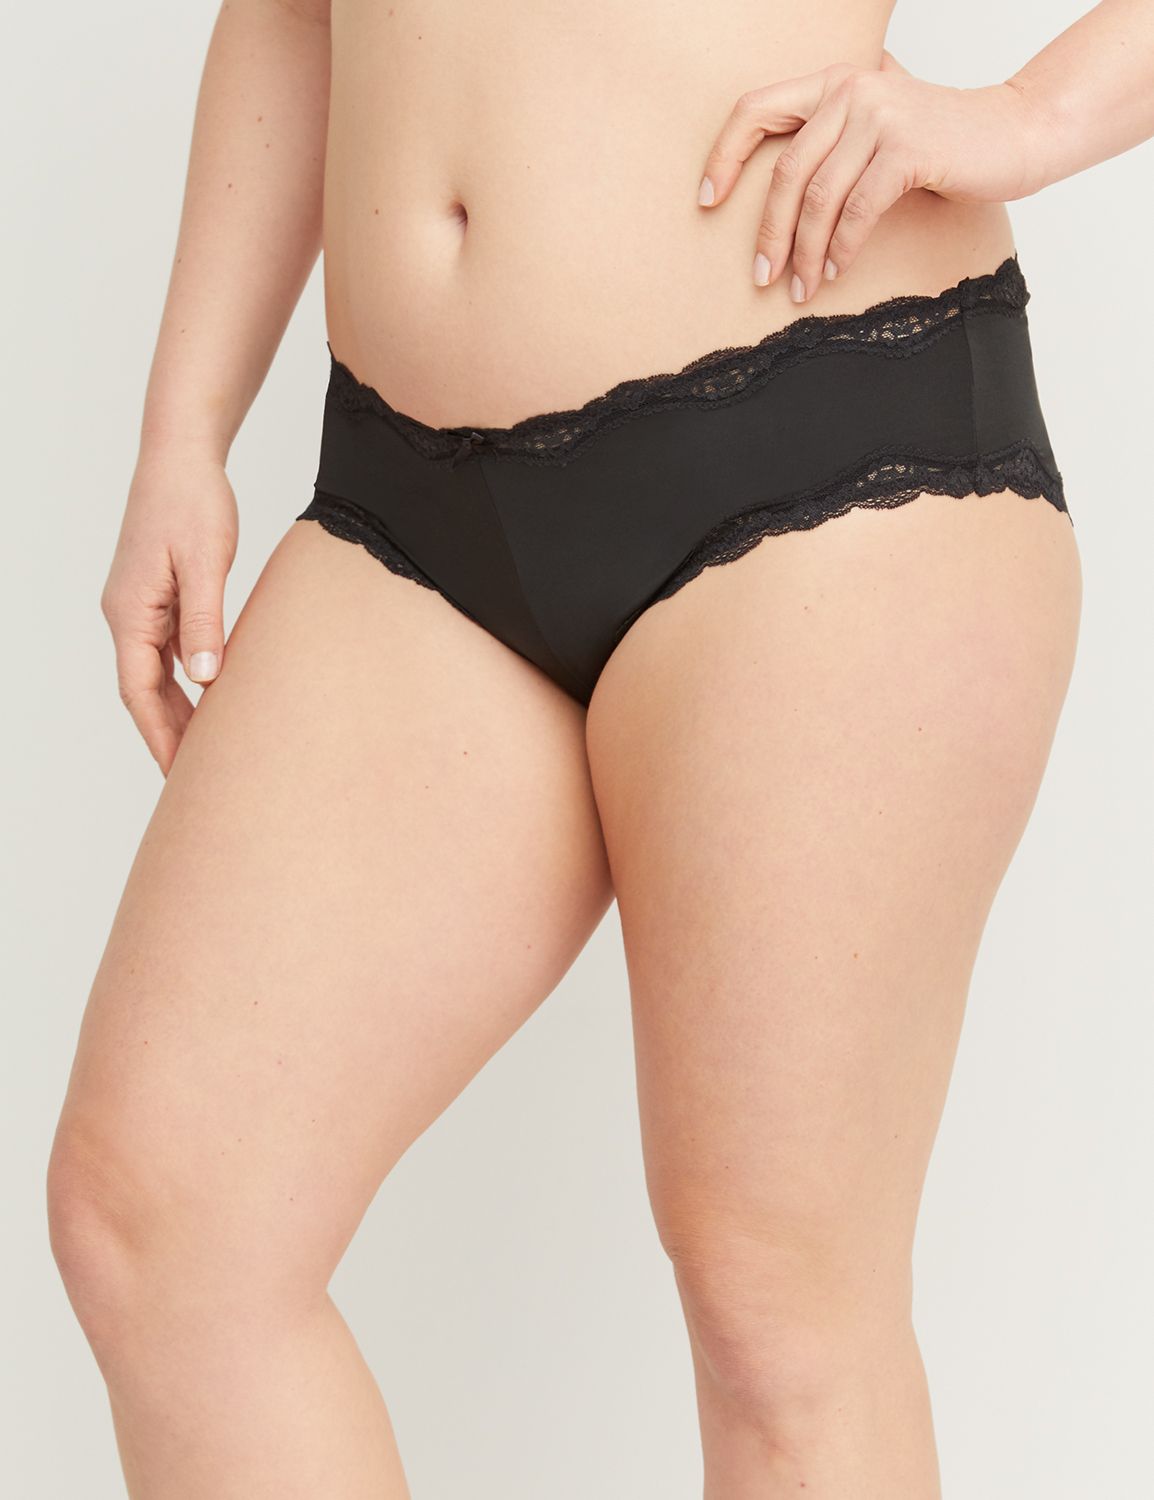 Boyshort Panties in Black Stretch Lace, Available Crotchless All Access  Panty 